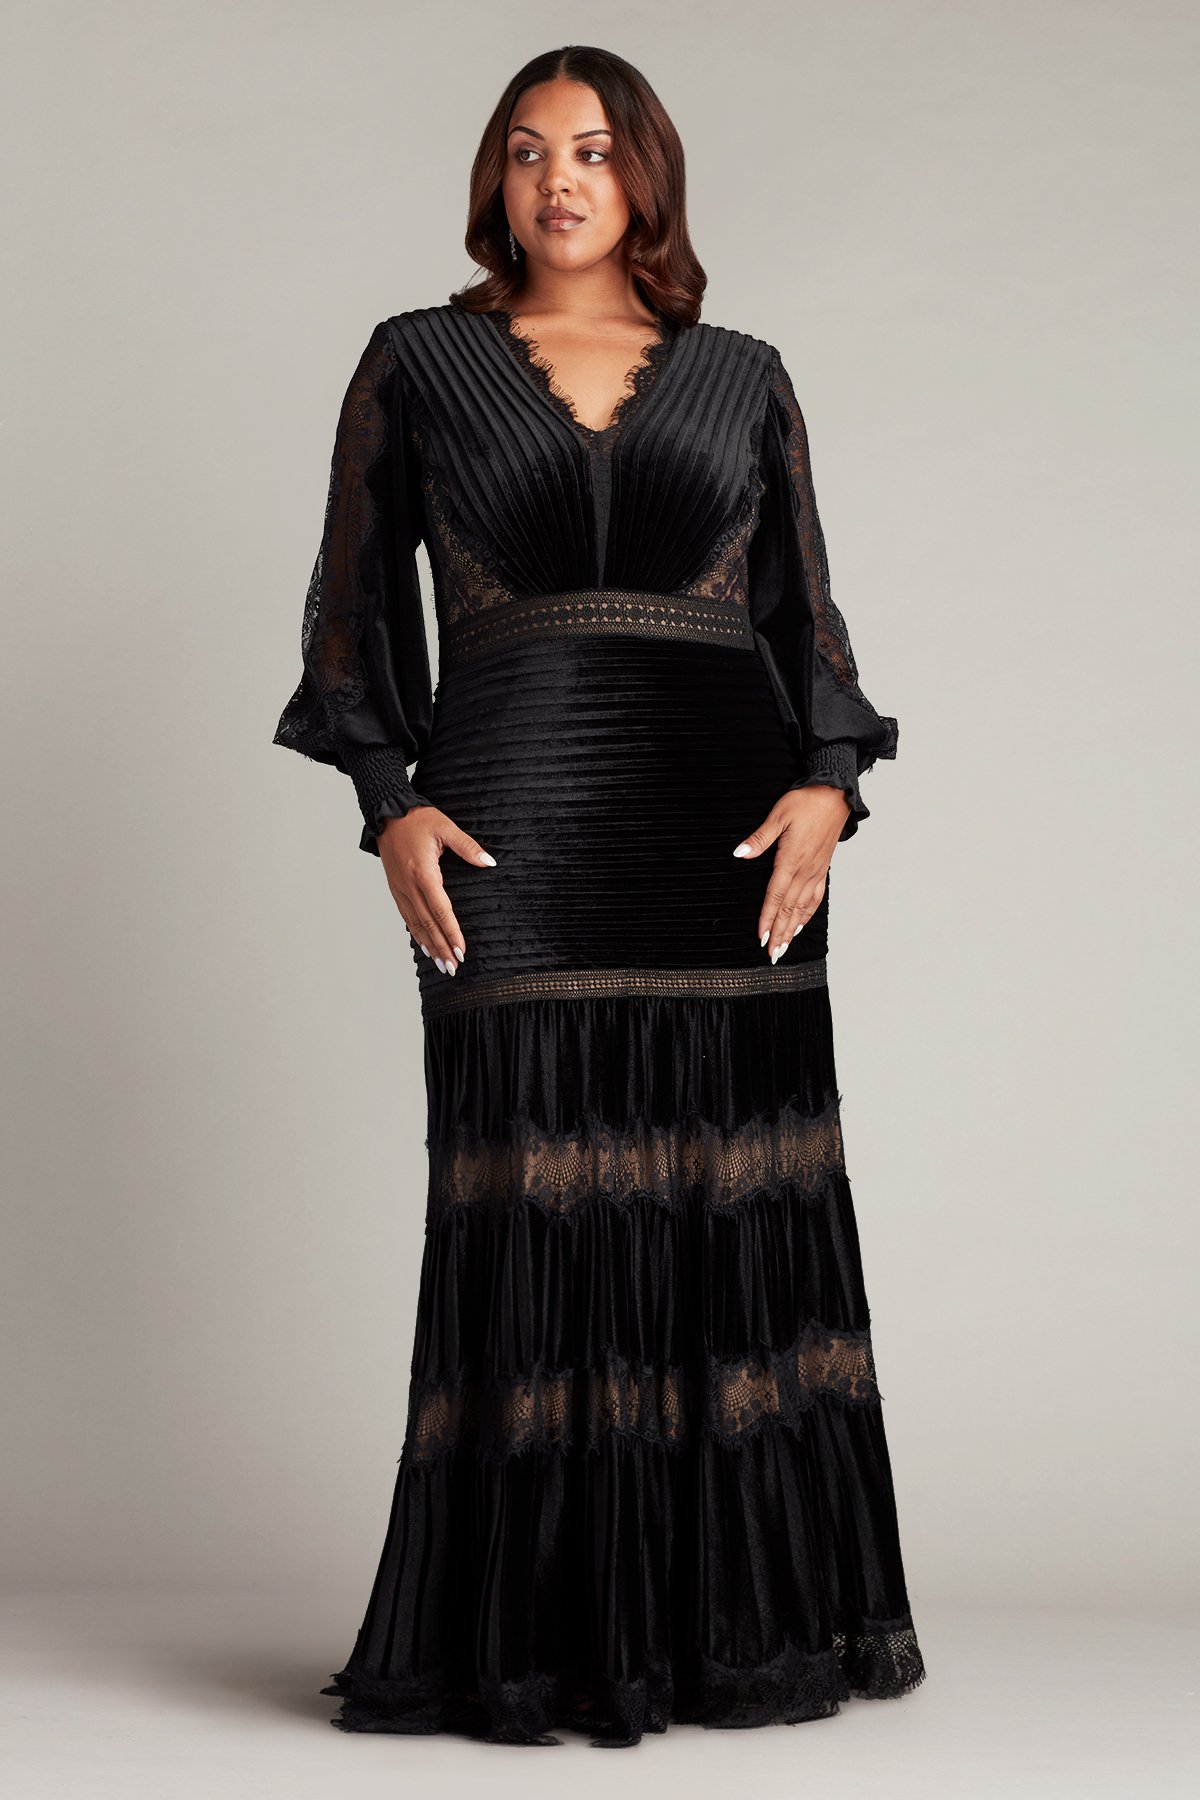 Plus-Size Lace Dresses, Evening Gowns in Plus Sizes